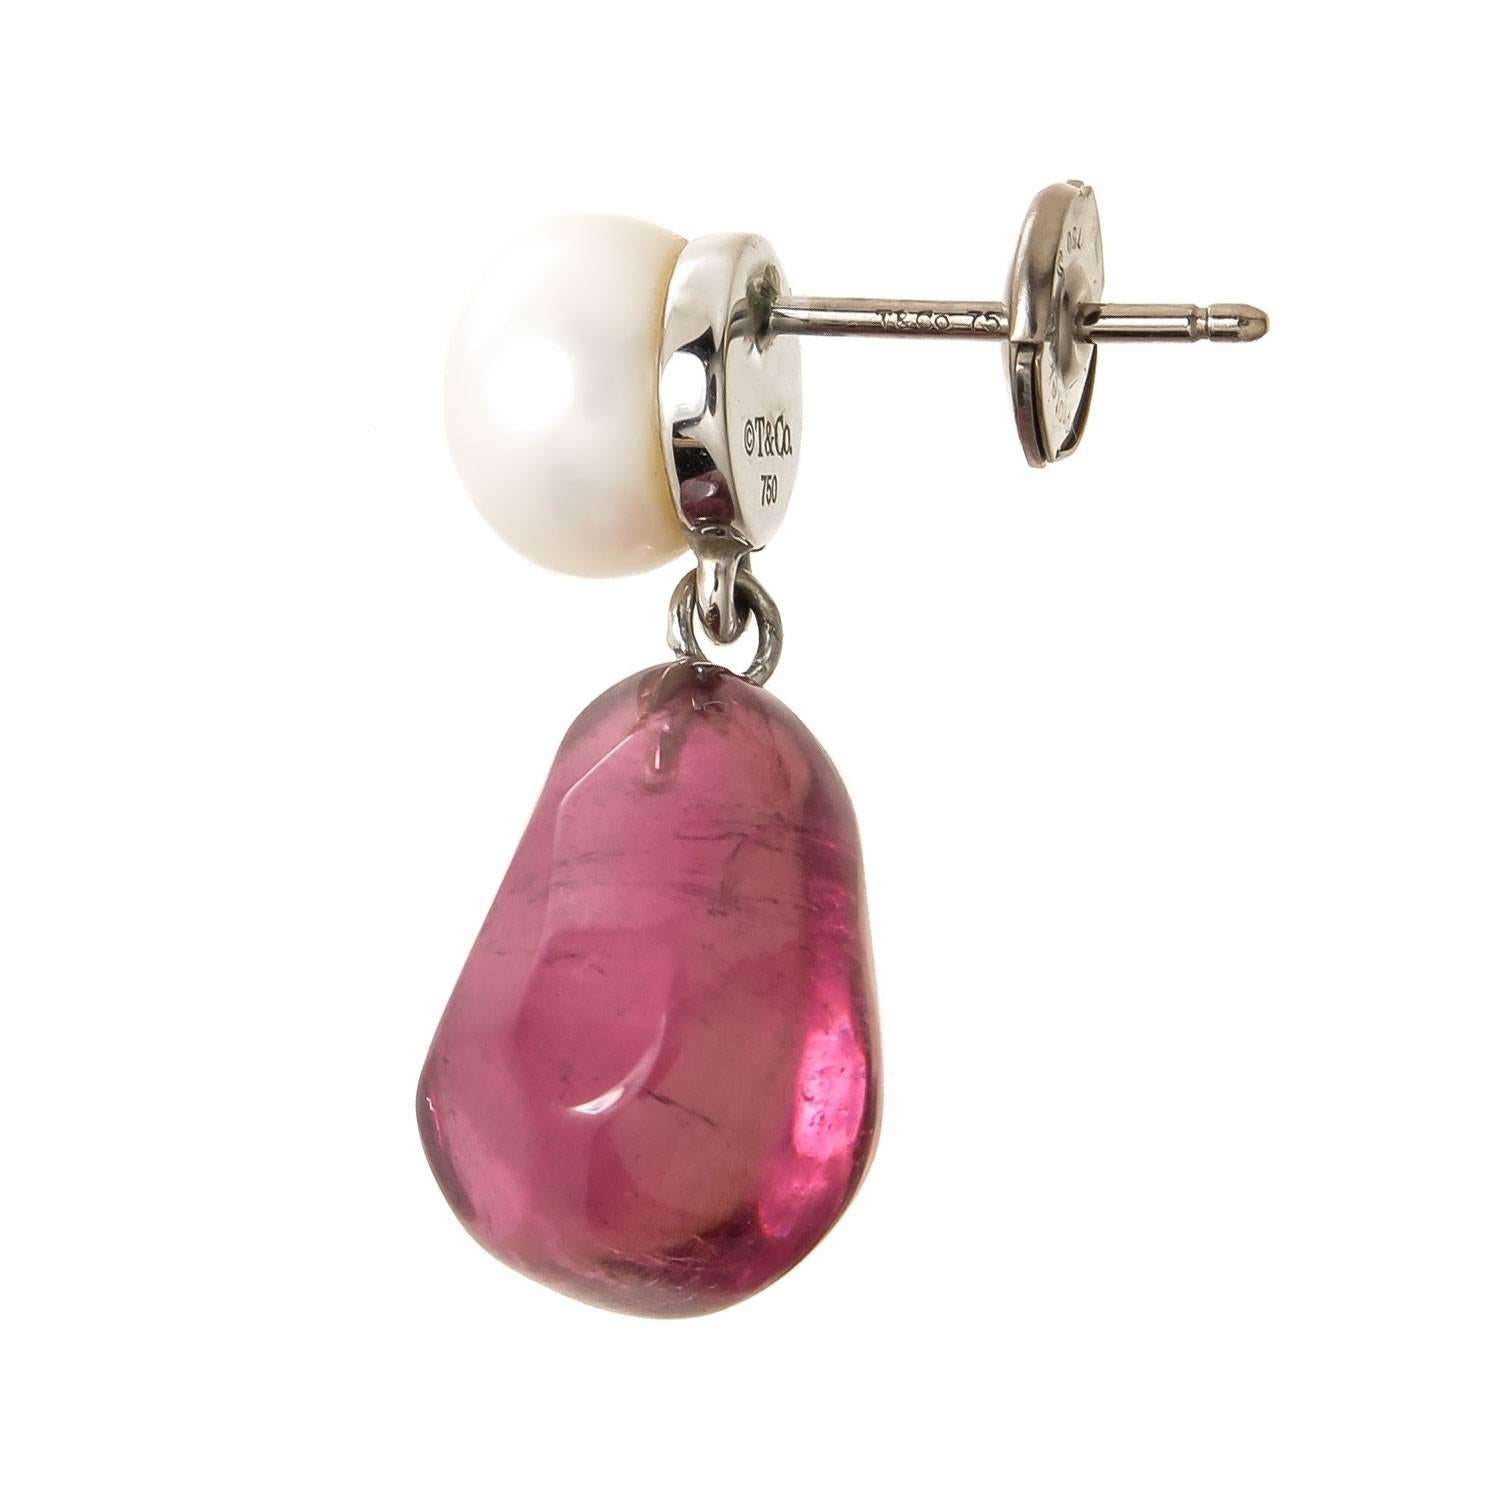 Circa 2005 Tiffany & Company 18K White gold Earrings set with a Fine Color Tumble, Polished Pink Tourmaline's with an 8 MM Button pearl set at the top. The earrings measure 1 inch in length with the Tourmaline's each measuring 14 X 11 MM.